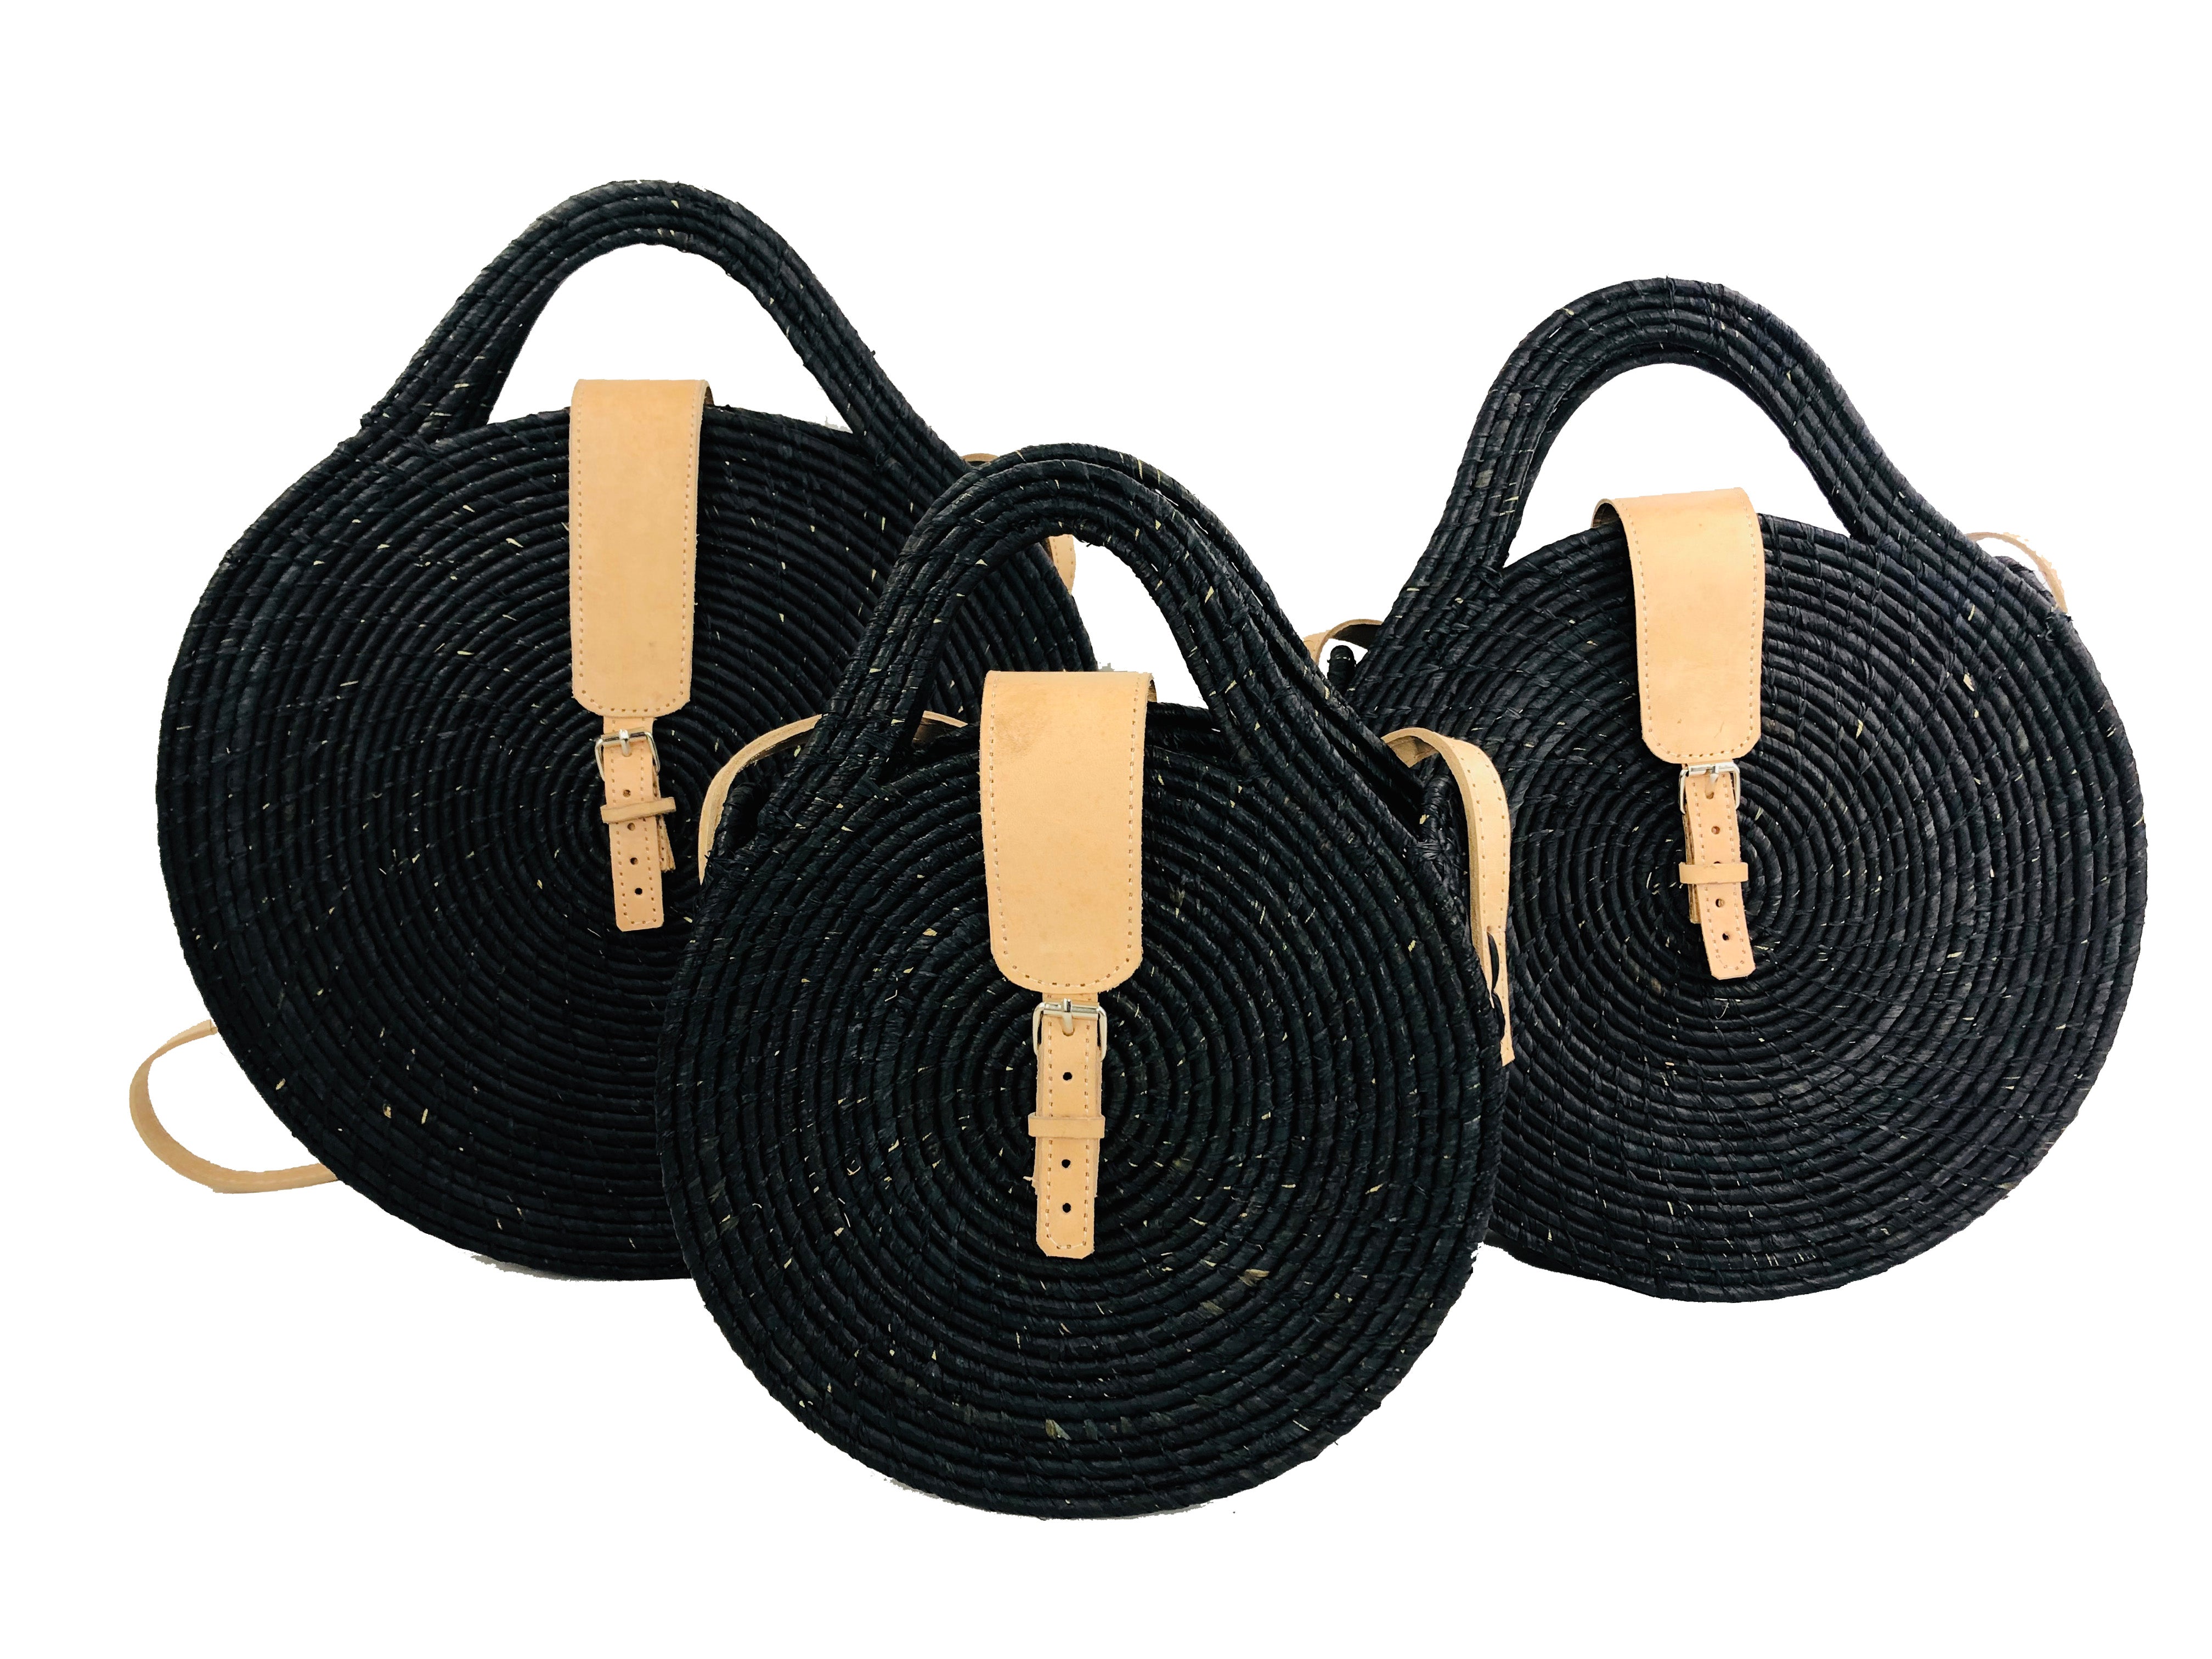 Shop Handwoven Round Rattan Bag - Perfect Gift for Summer